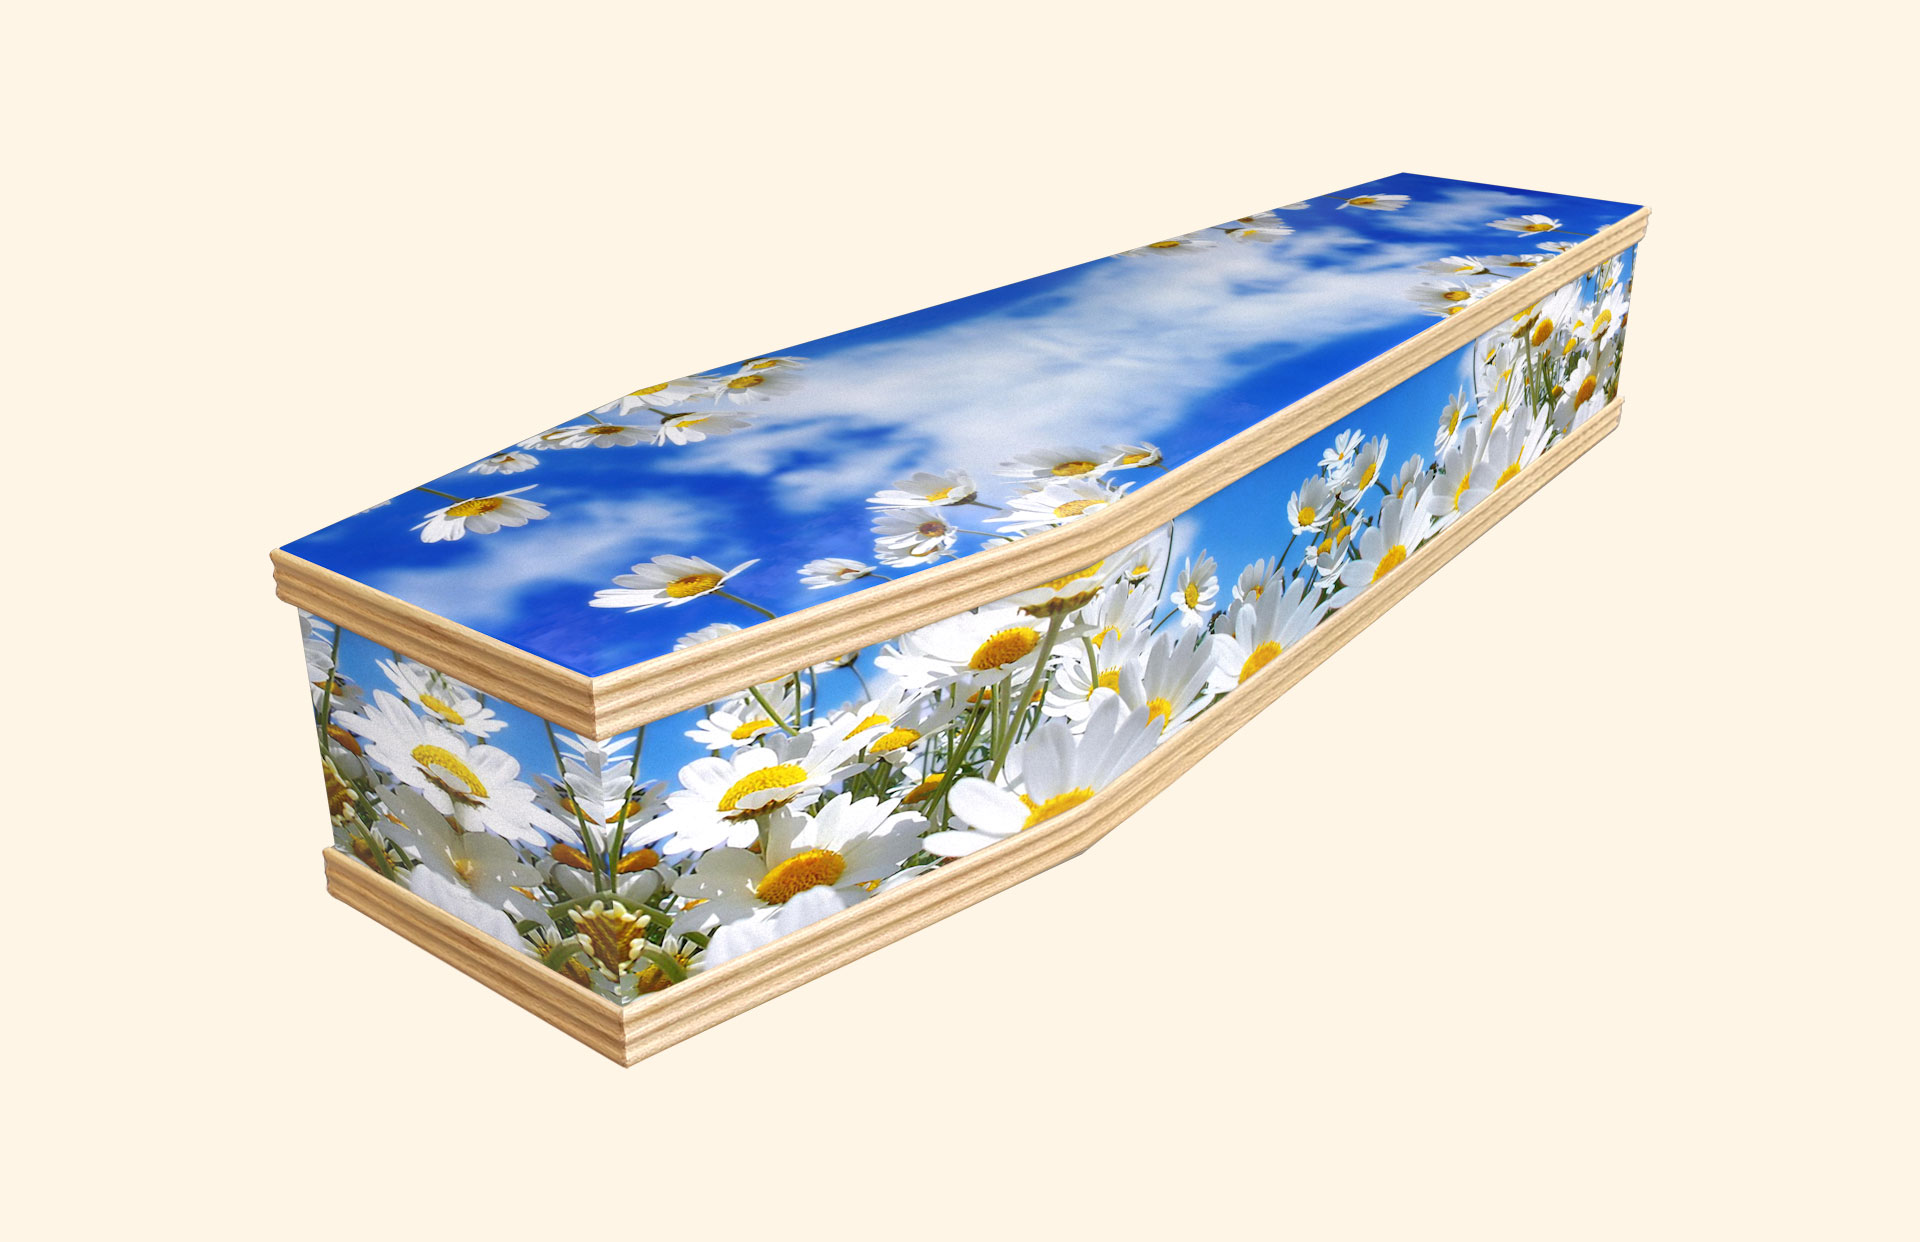 Dancing Free design on a classic coffin